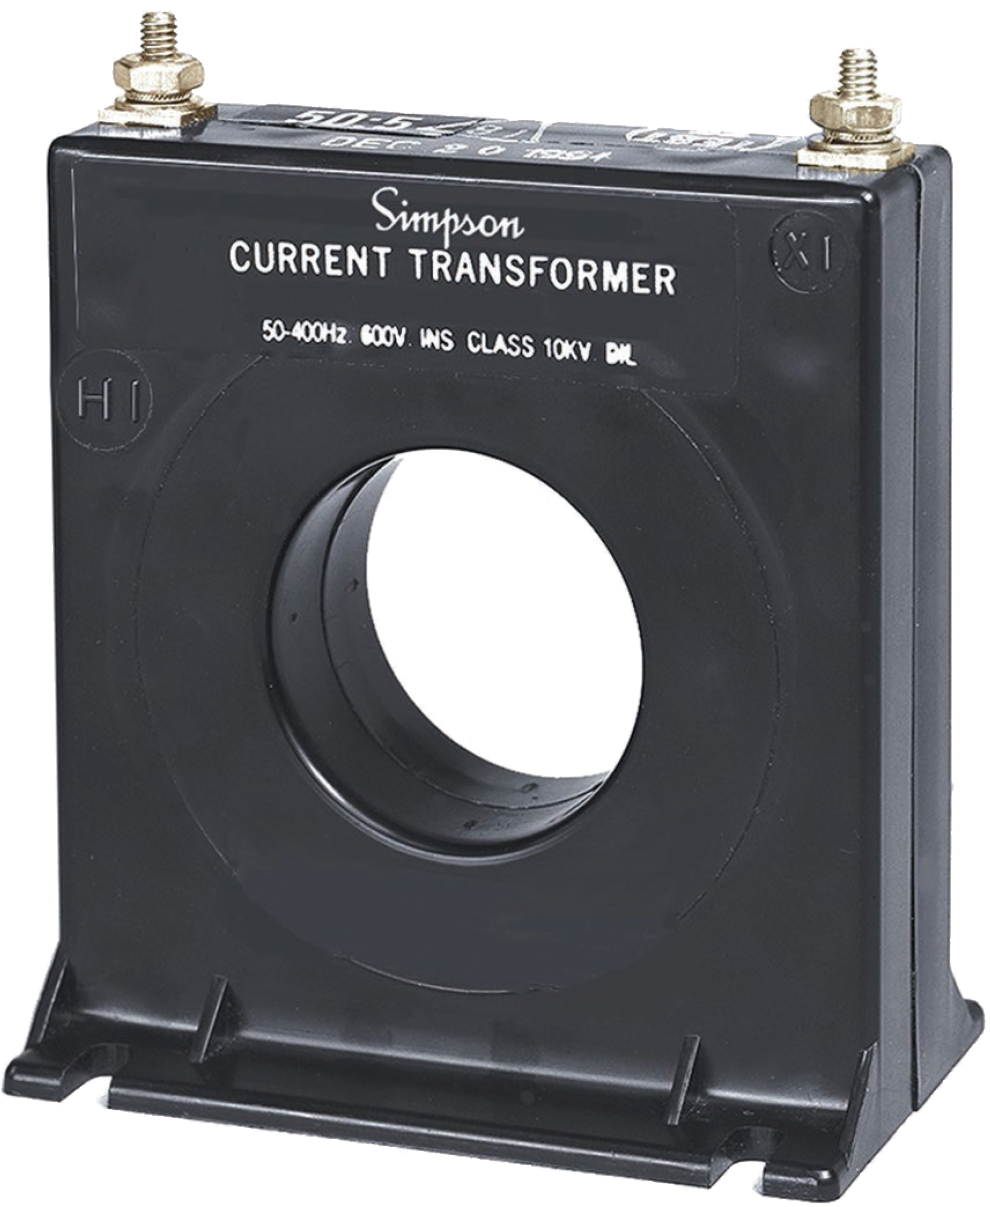 Current transformer to measure current